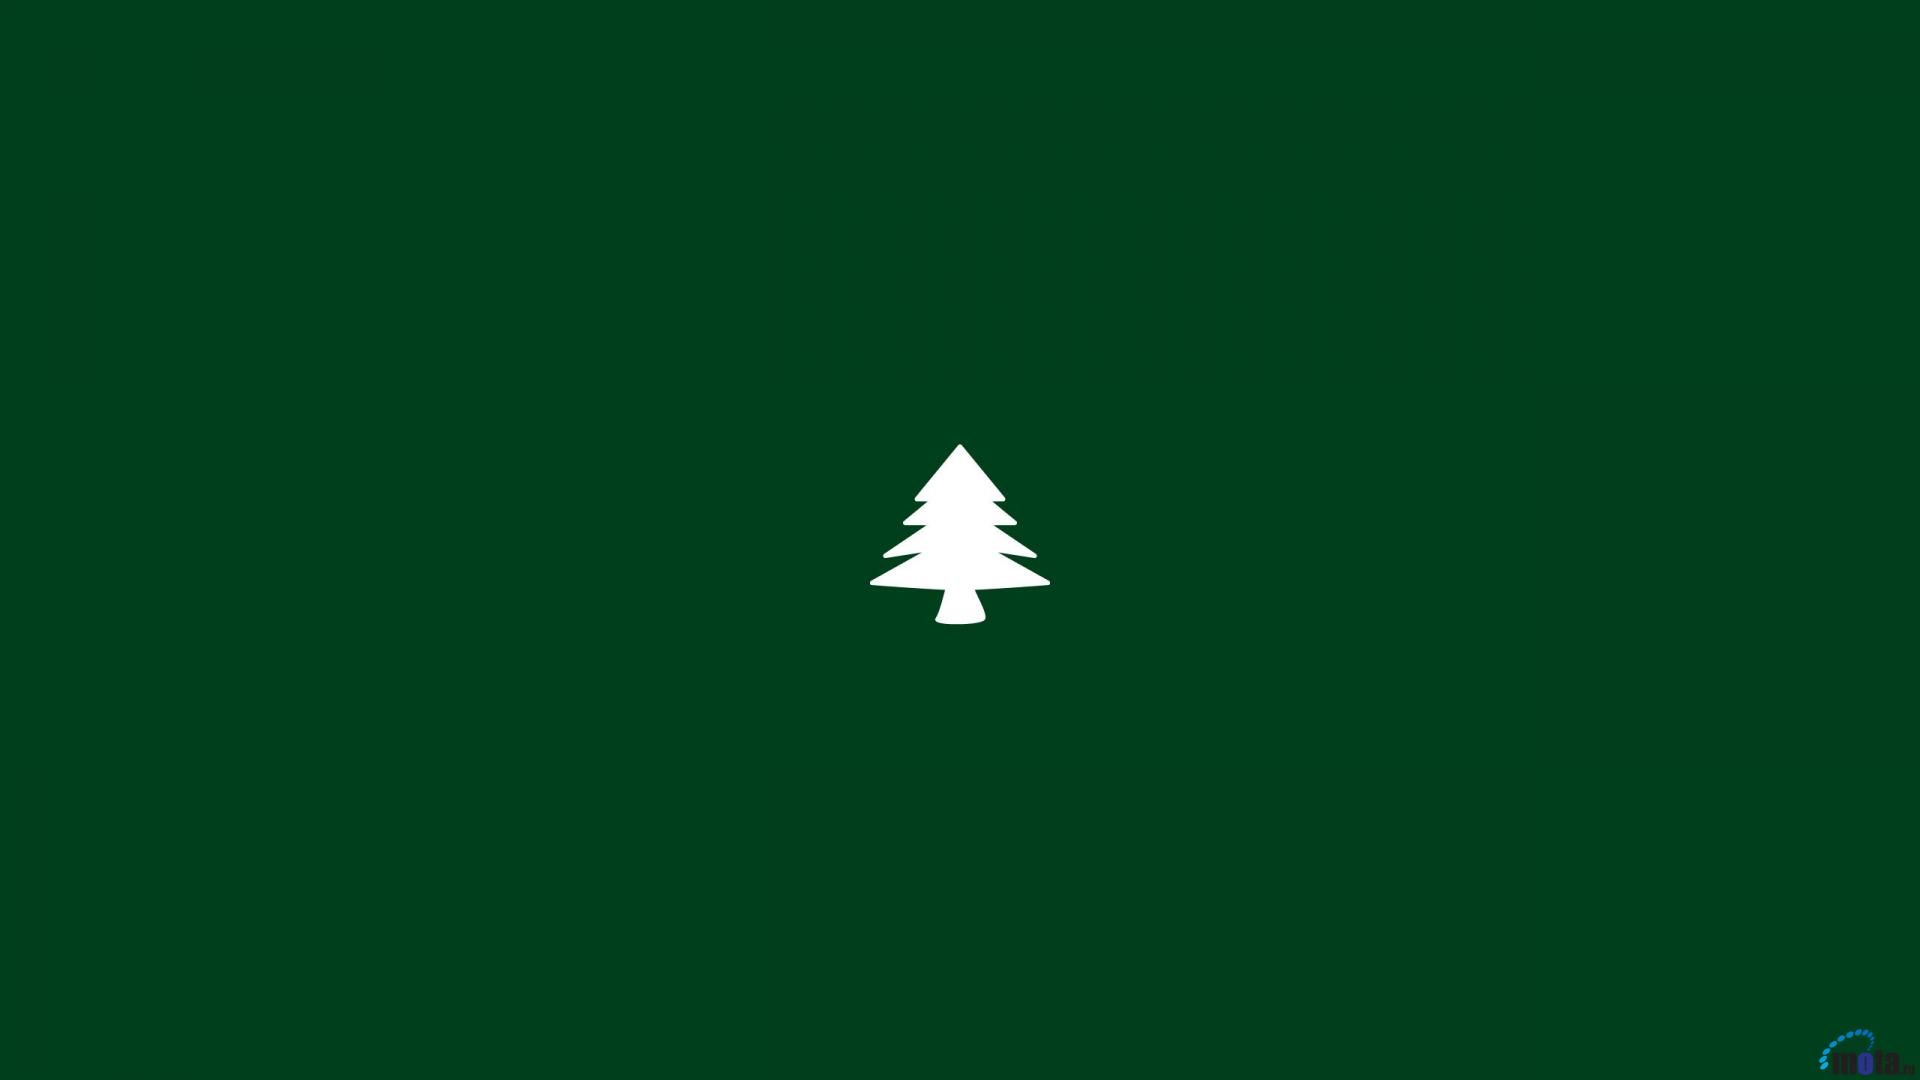 Minimalist Christmas Wallpaper for Desktop and iPhone